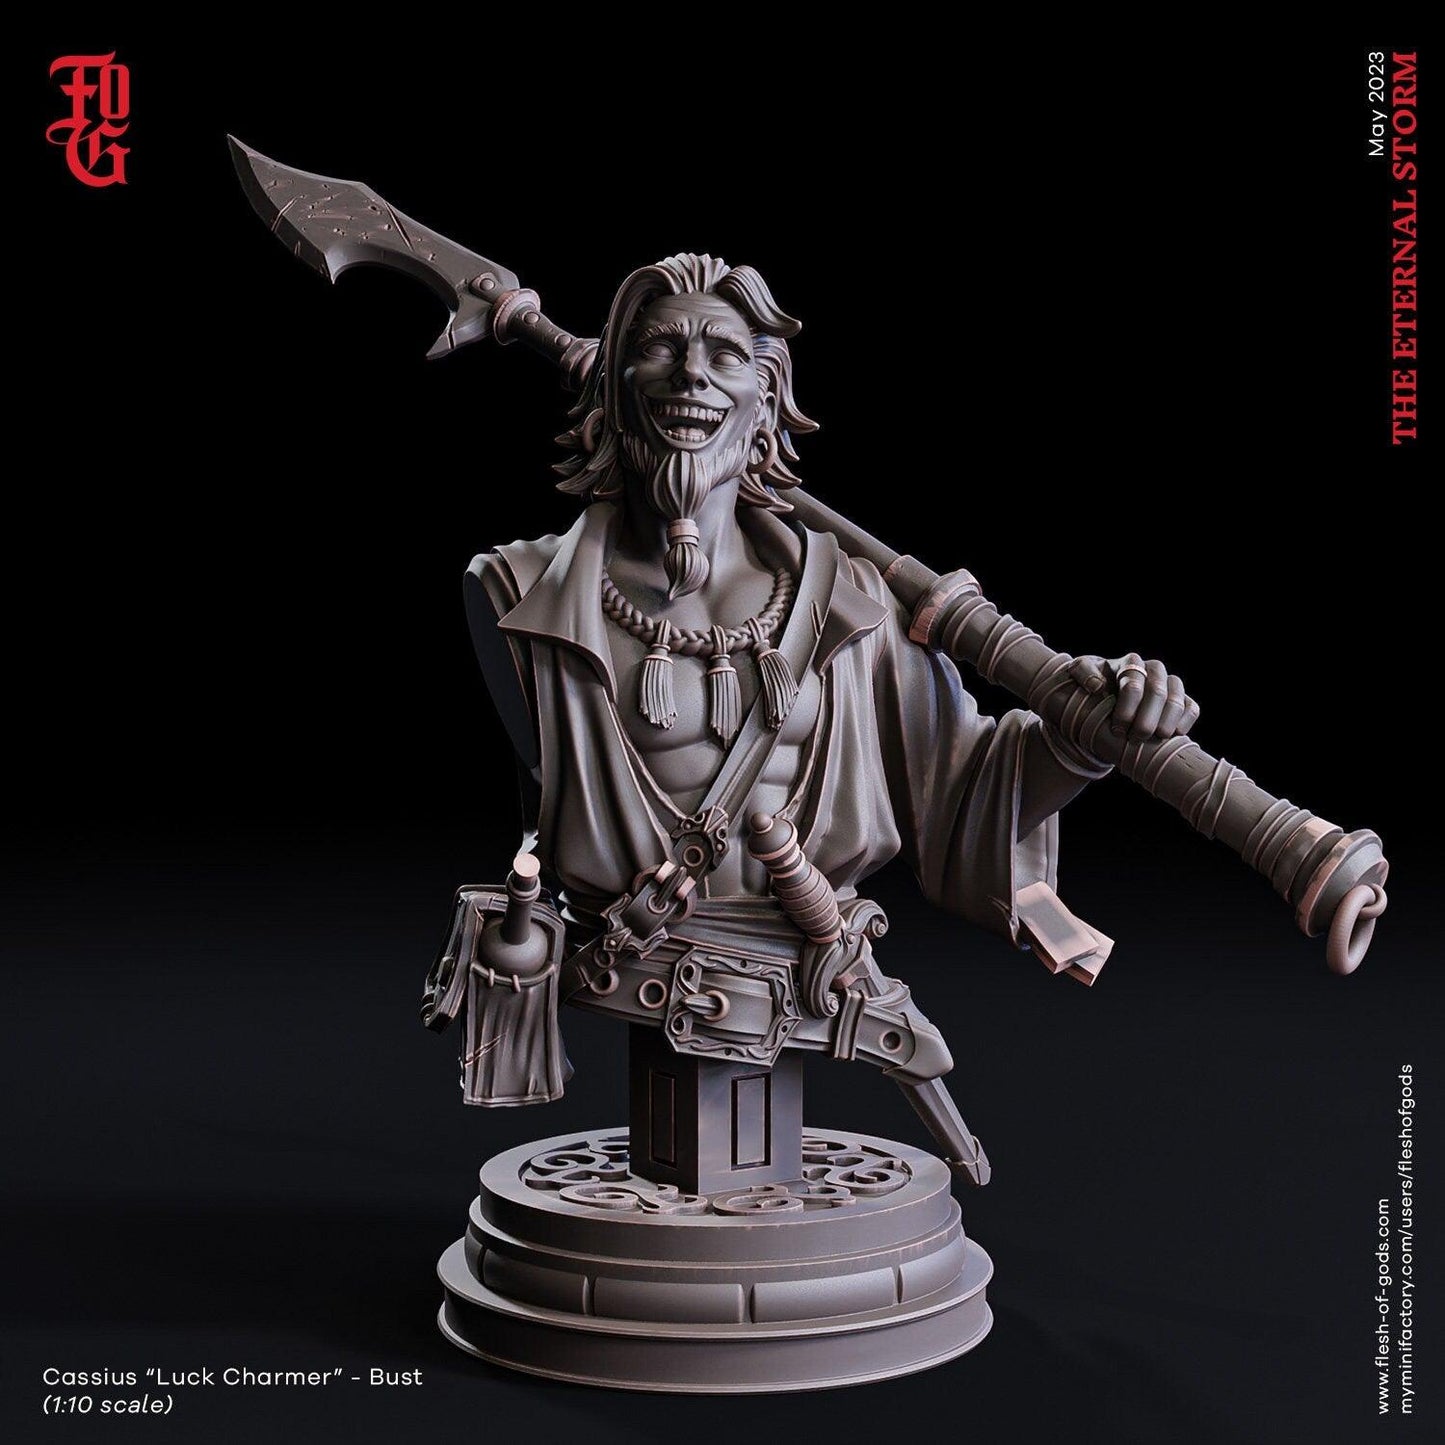 Pirate Bust Lucky Charmer Statue | 25mm 75mm and Bust | DnD Miniature Dungeons and Dragons DnD 5e | Thief Miniature DnD Statue Resin Bust - Plague Miniatures shop for DnD Miniatures